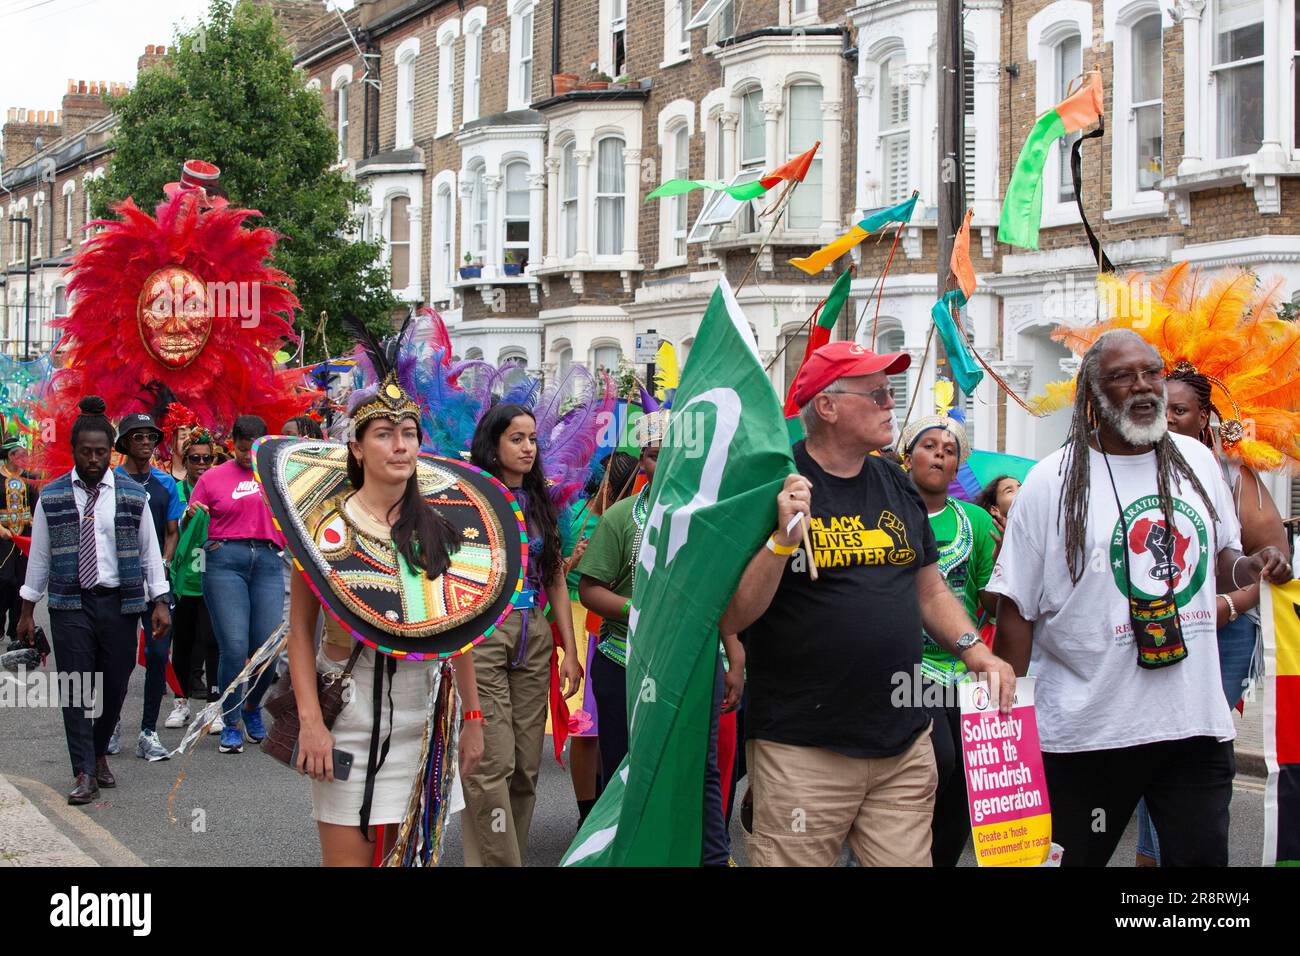 London, UK. 23rd June, 2023. A procession through Brixton, along Railton Road to Windrush Square, marked the 75th anniversary of the Empire Windrush docking at Tilbury, bringing the first workers from Jamaica who had responded to an appeal for help from the British government. Credit: Anna Watson/Alamy Live News Stock Photo